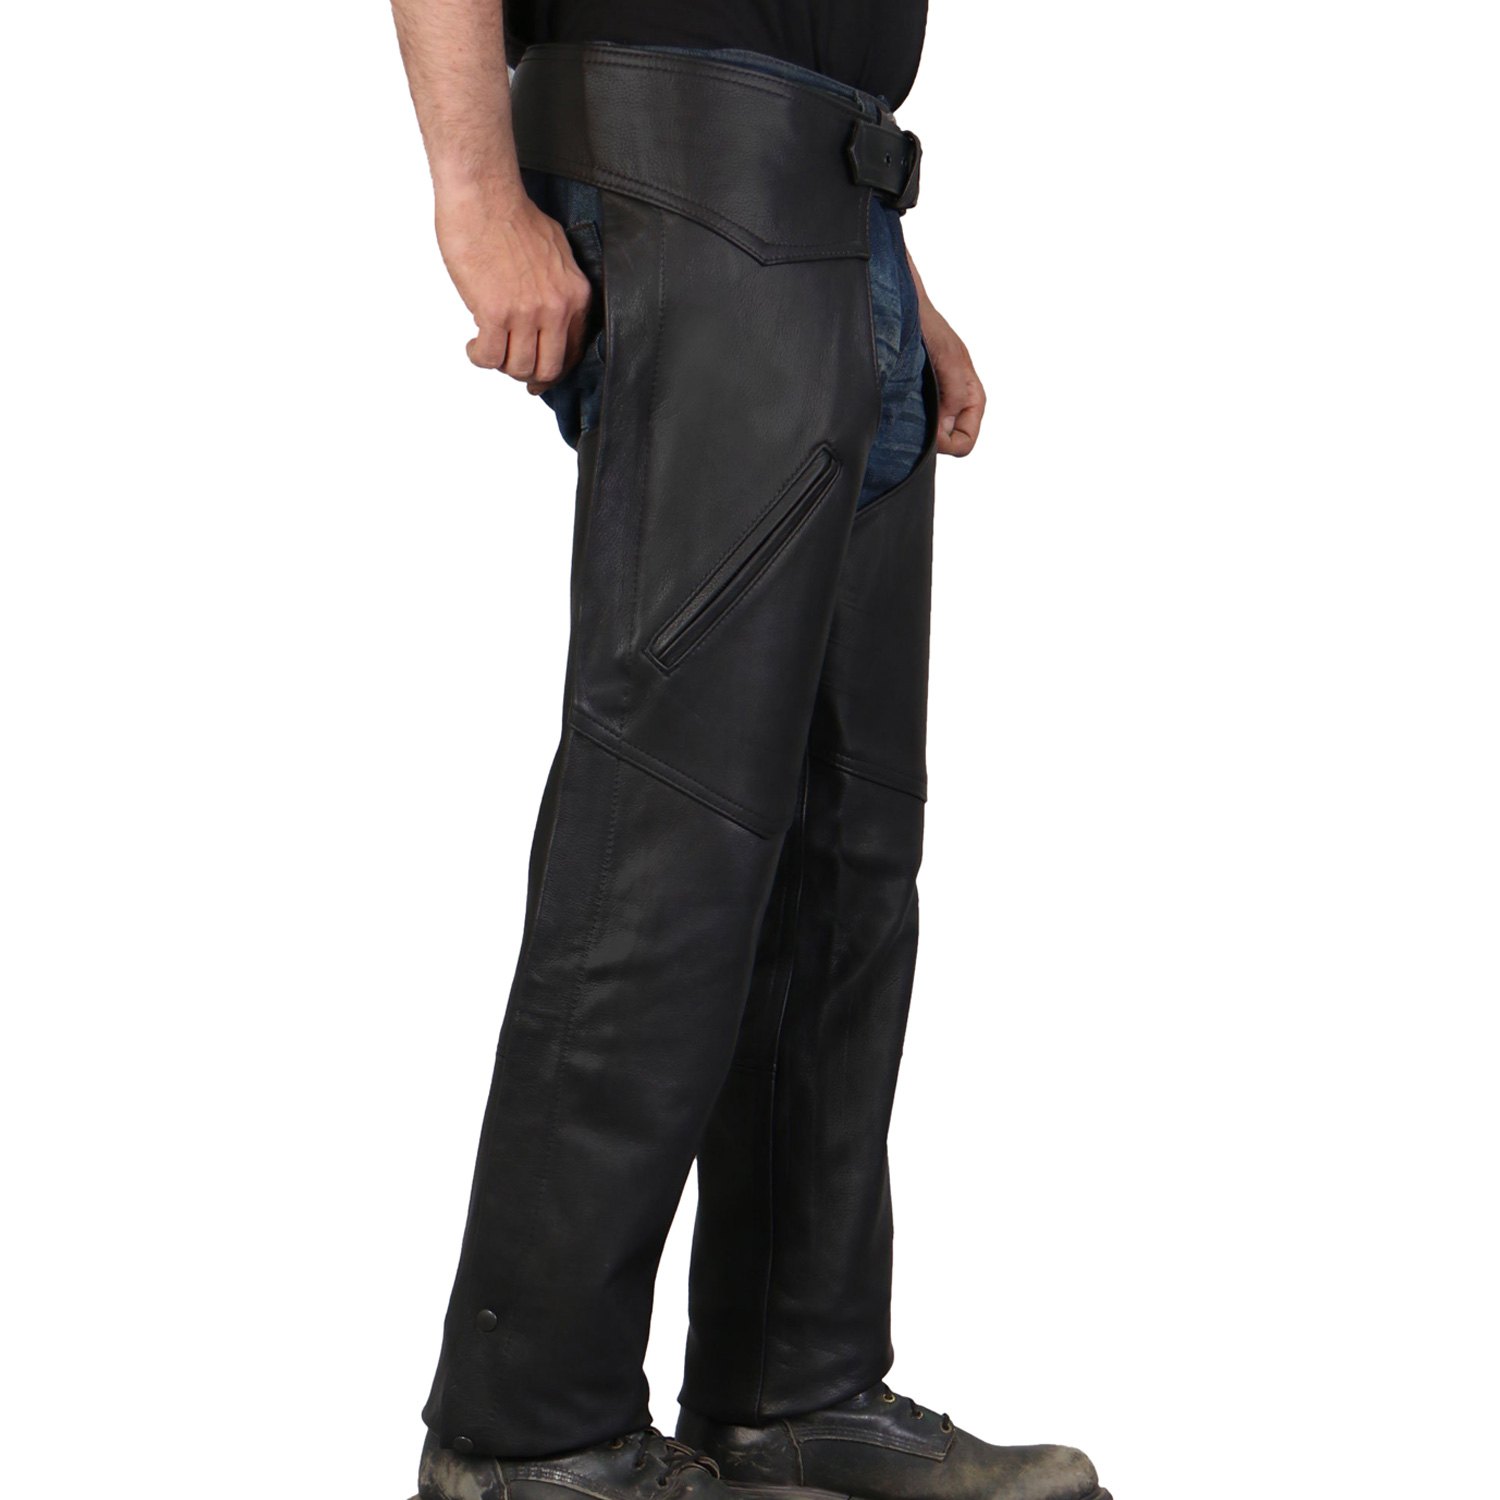 Hot Leathers® 13211 - Men's Leather Chaps (Large, Black) - MOTORCYCLEiD.com